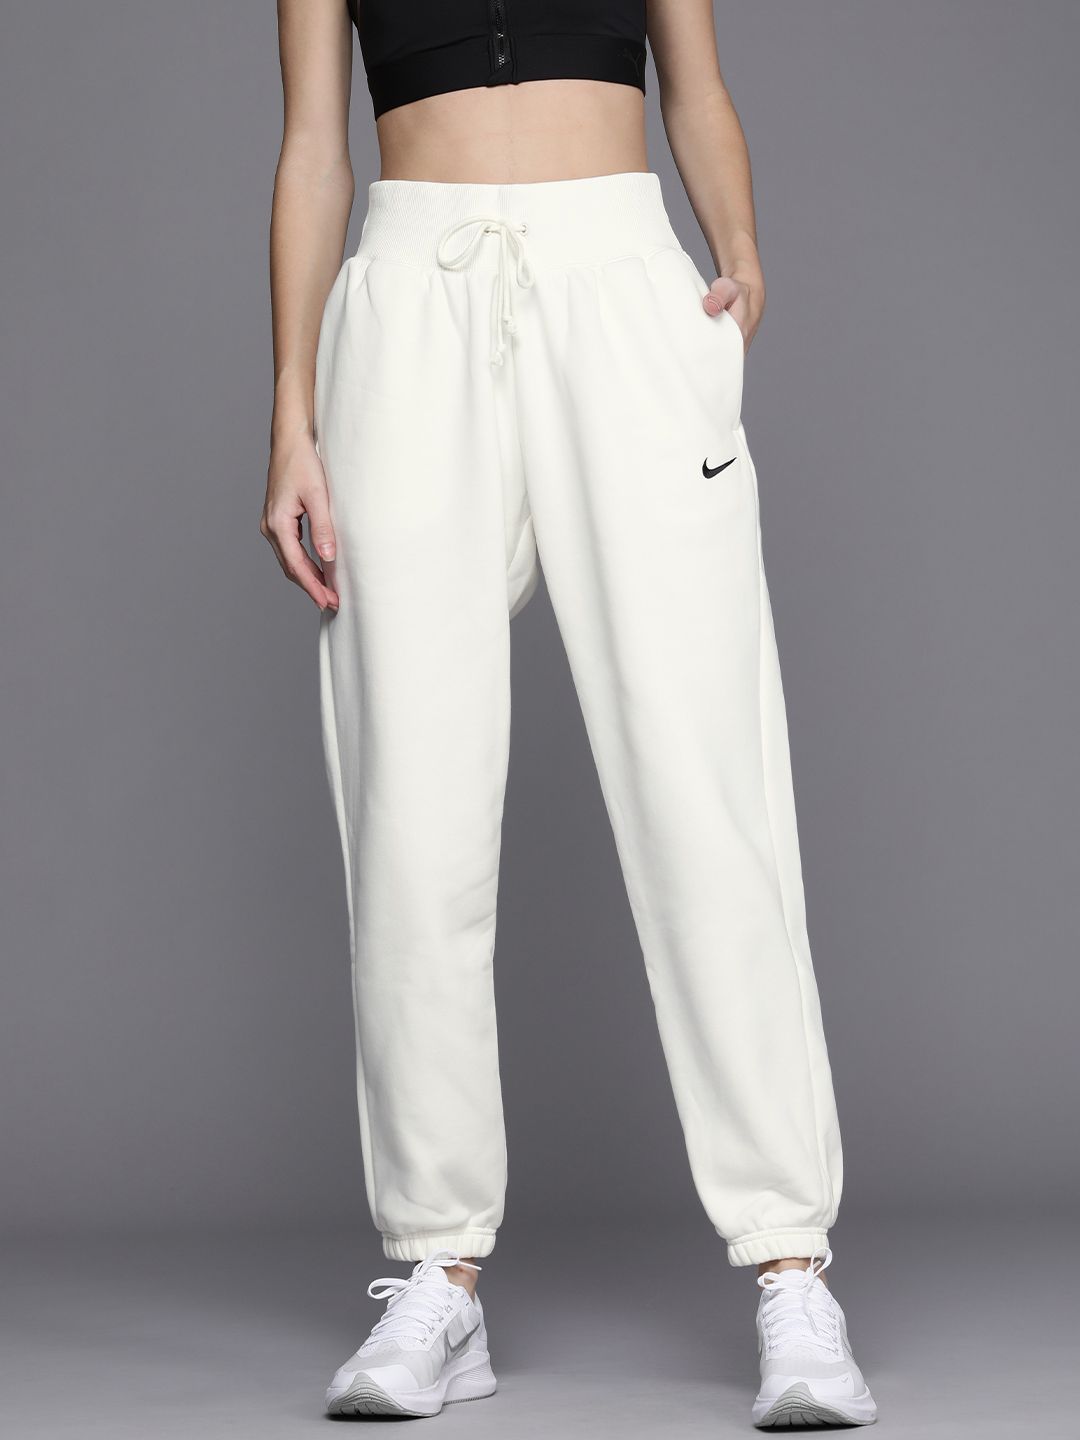 Nike Women White Solid NSW PHNX Fleece High Waist Relaxed Fit Joggers Price in India